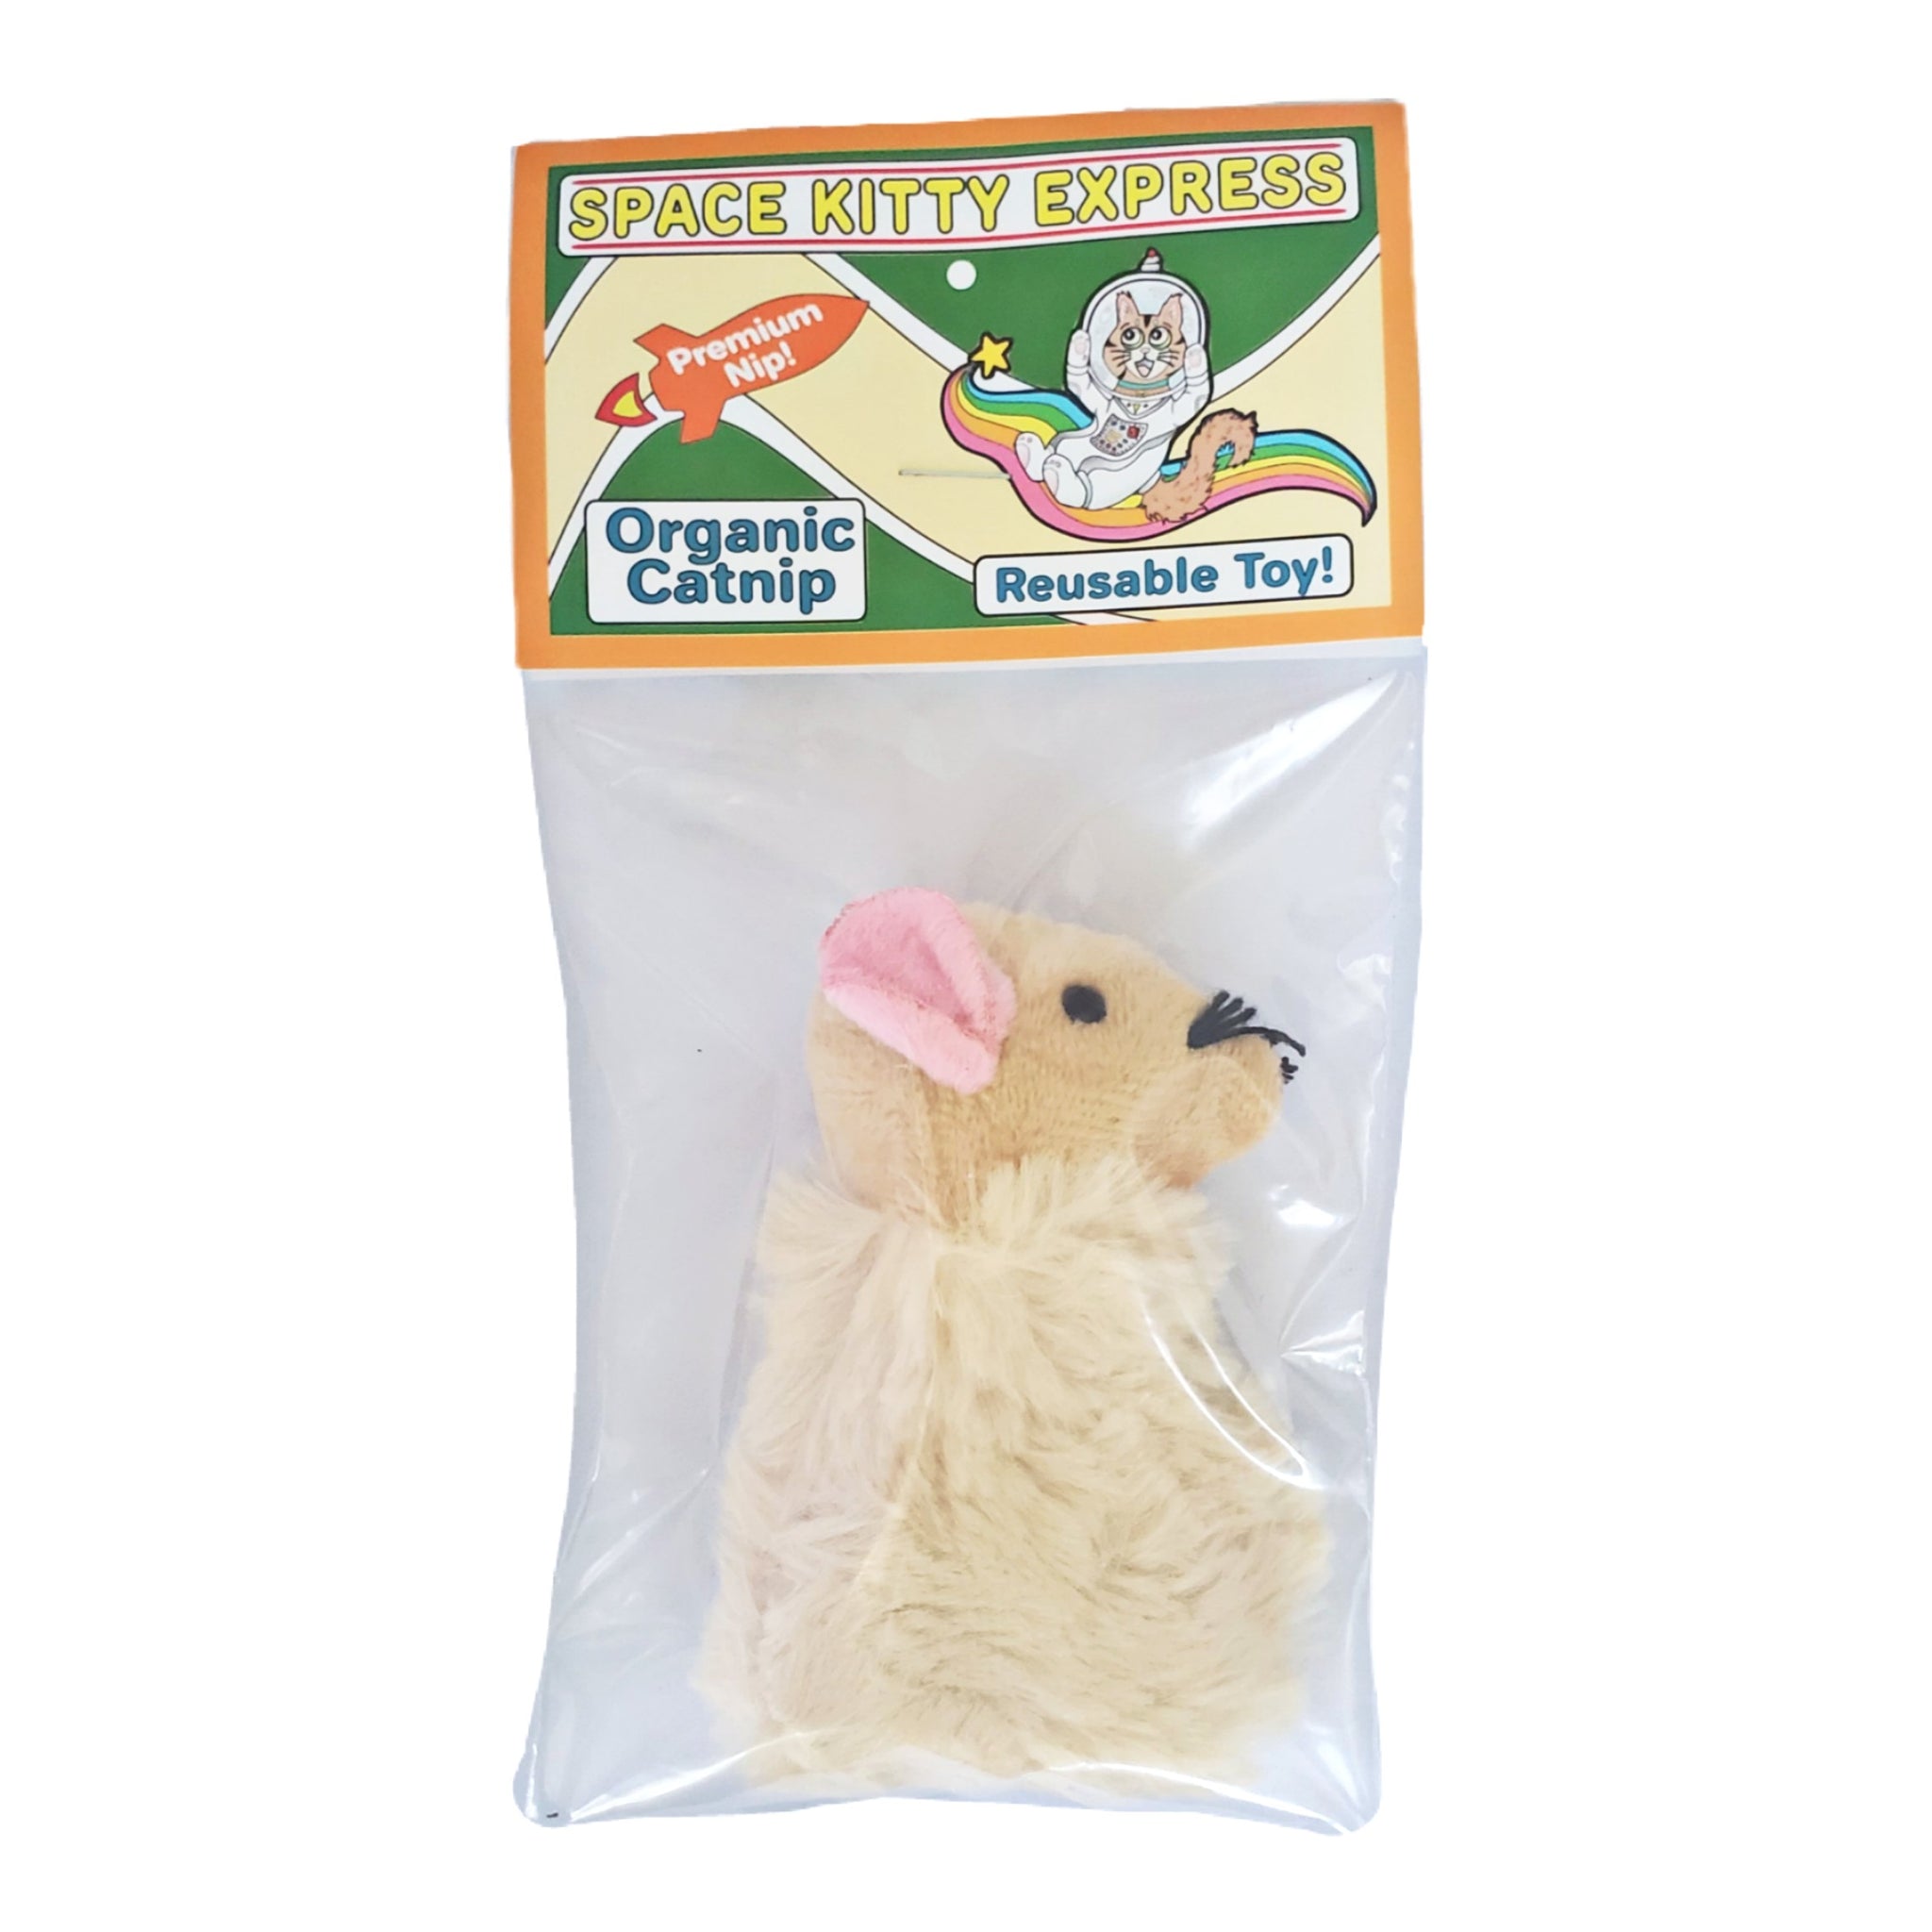 Refillable Beige Mouse with Organic Catnip by Space Kitty Express